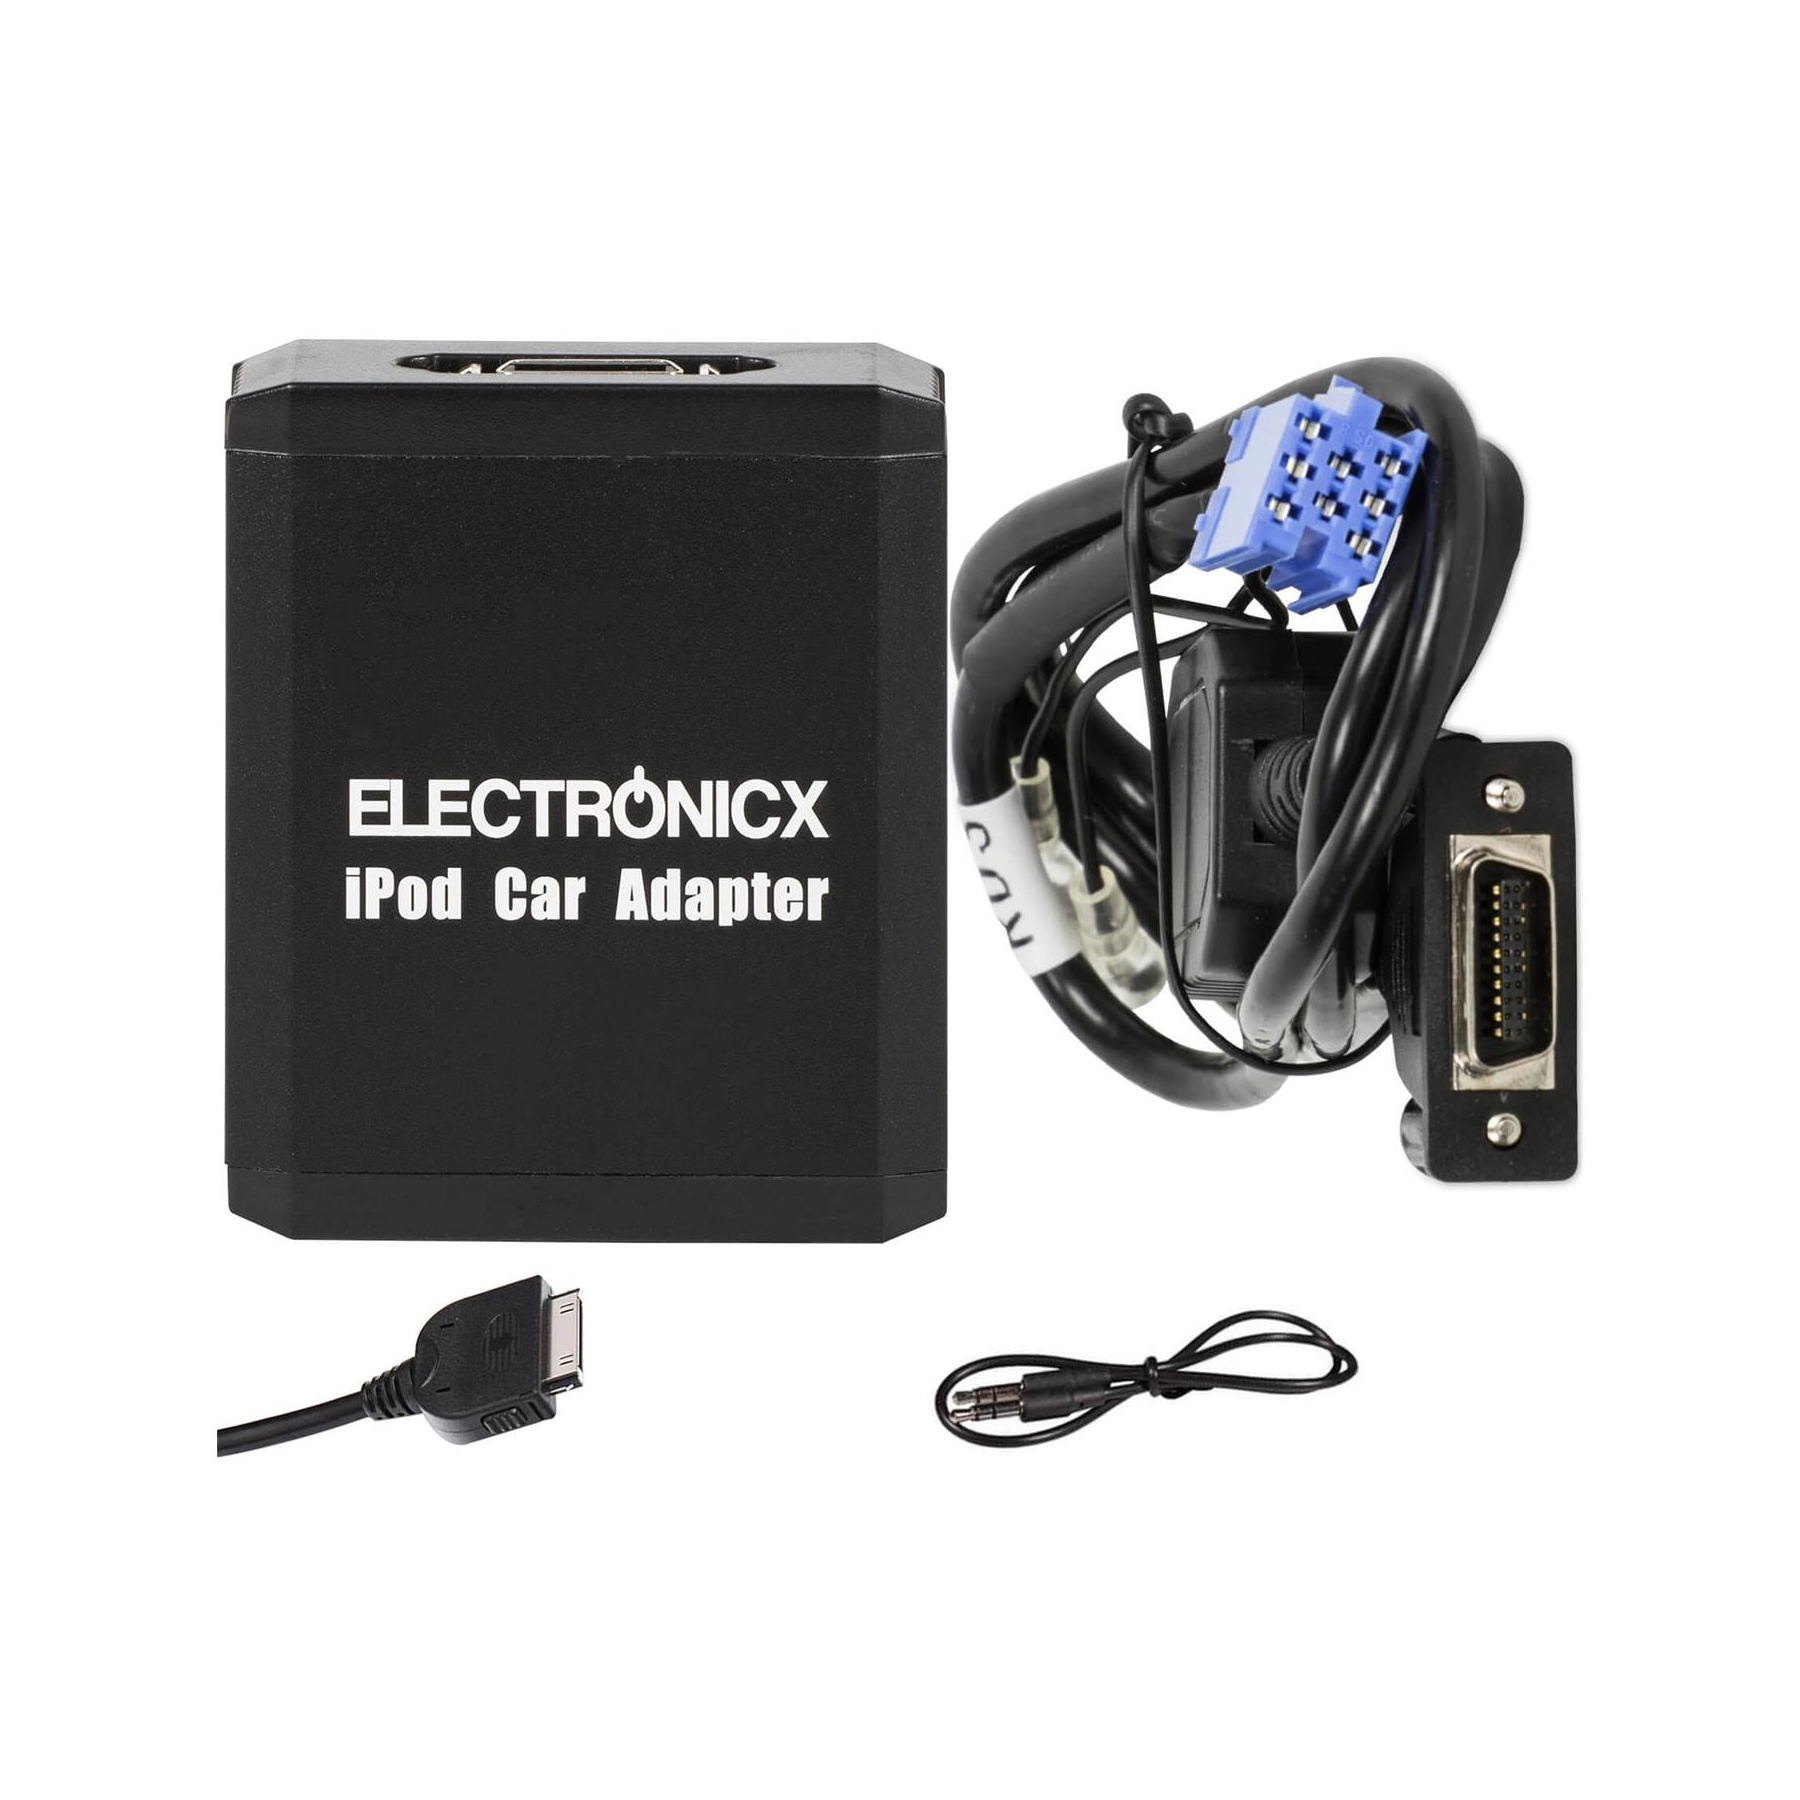 https://electronicx.de/media/image/product/121/lg/adapter-aux-iphone-ipad-ipod-cd-wechsler-rd3-radios.jpg